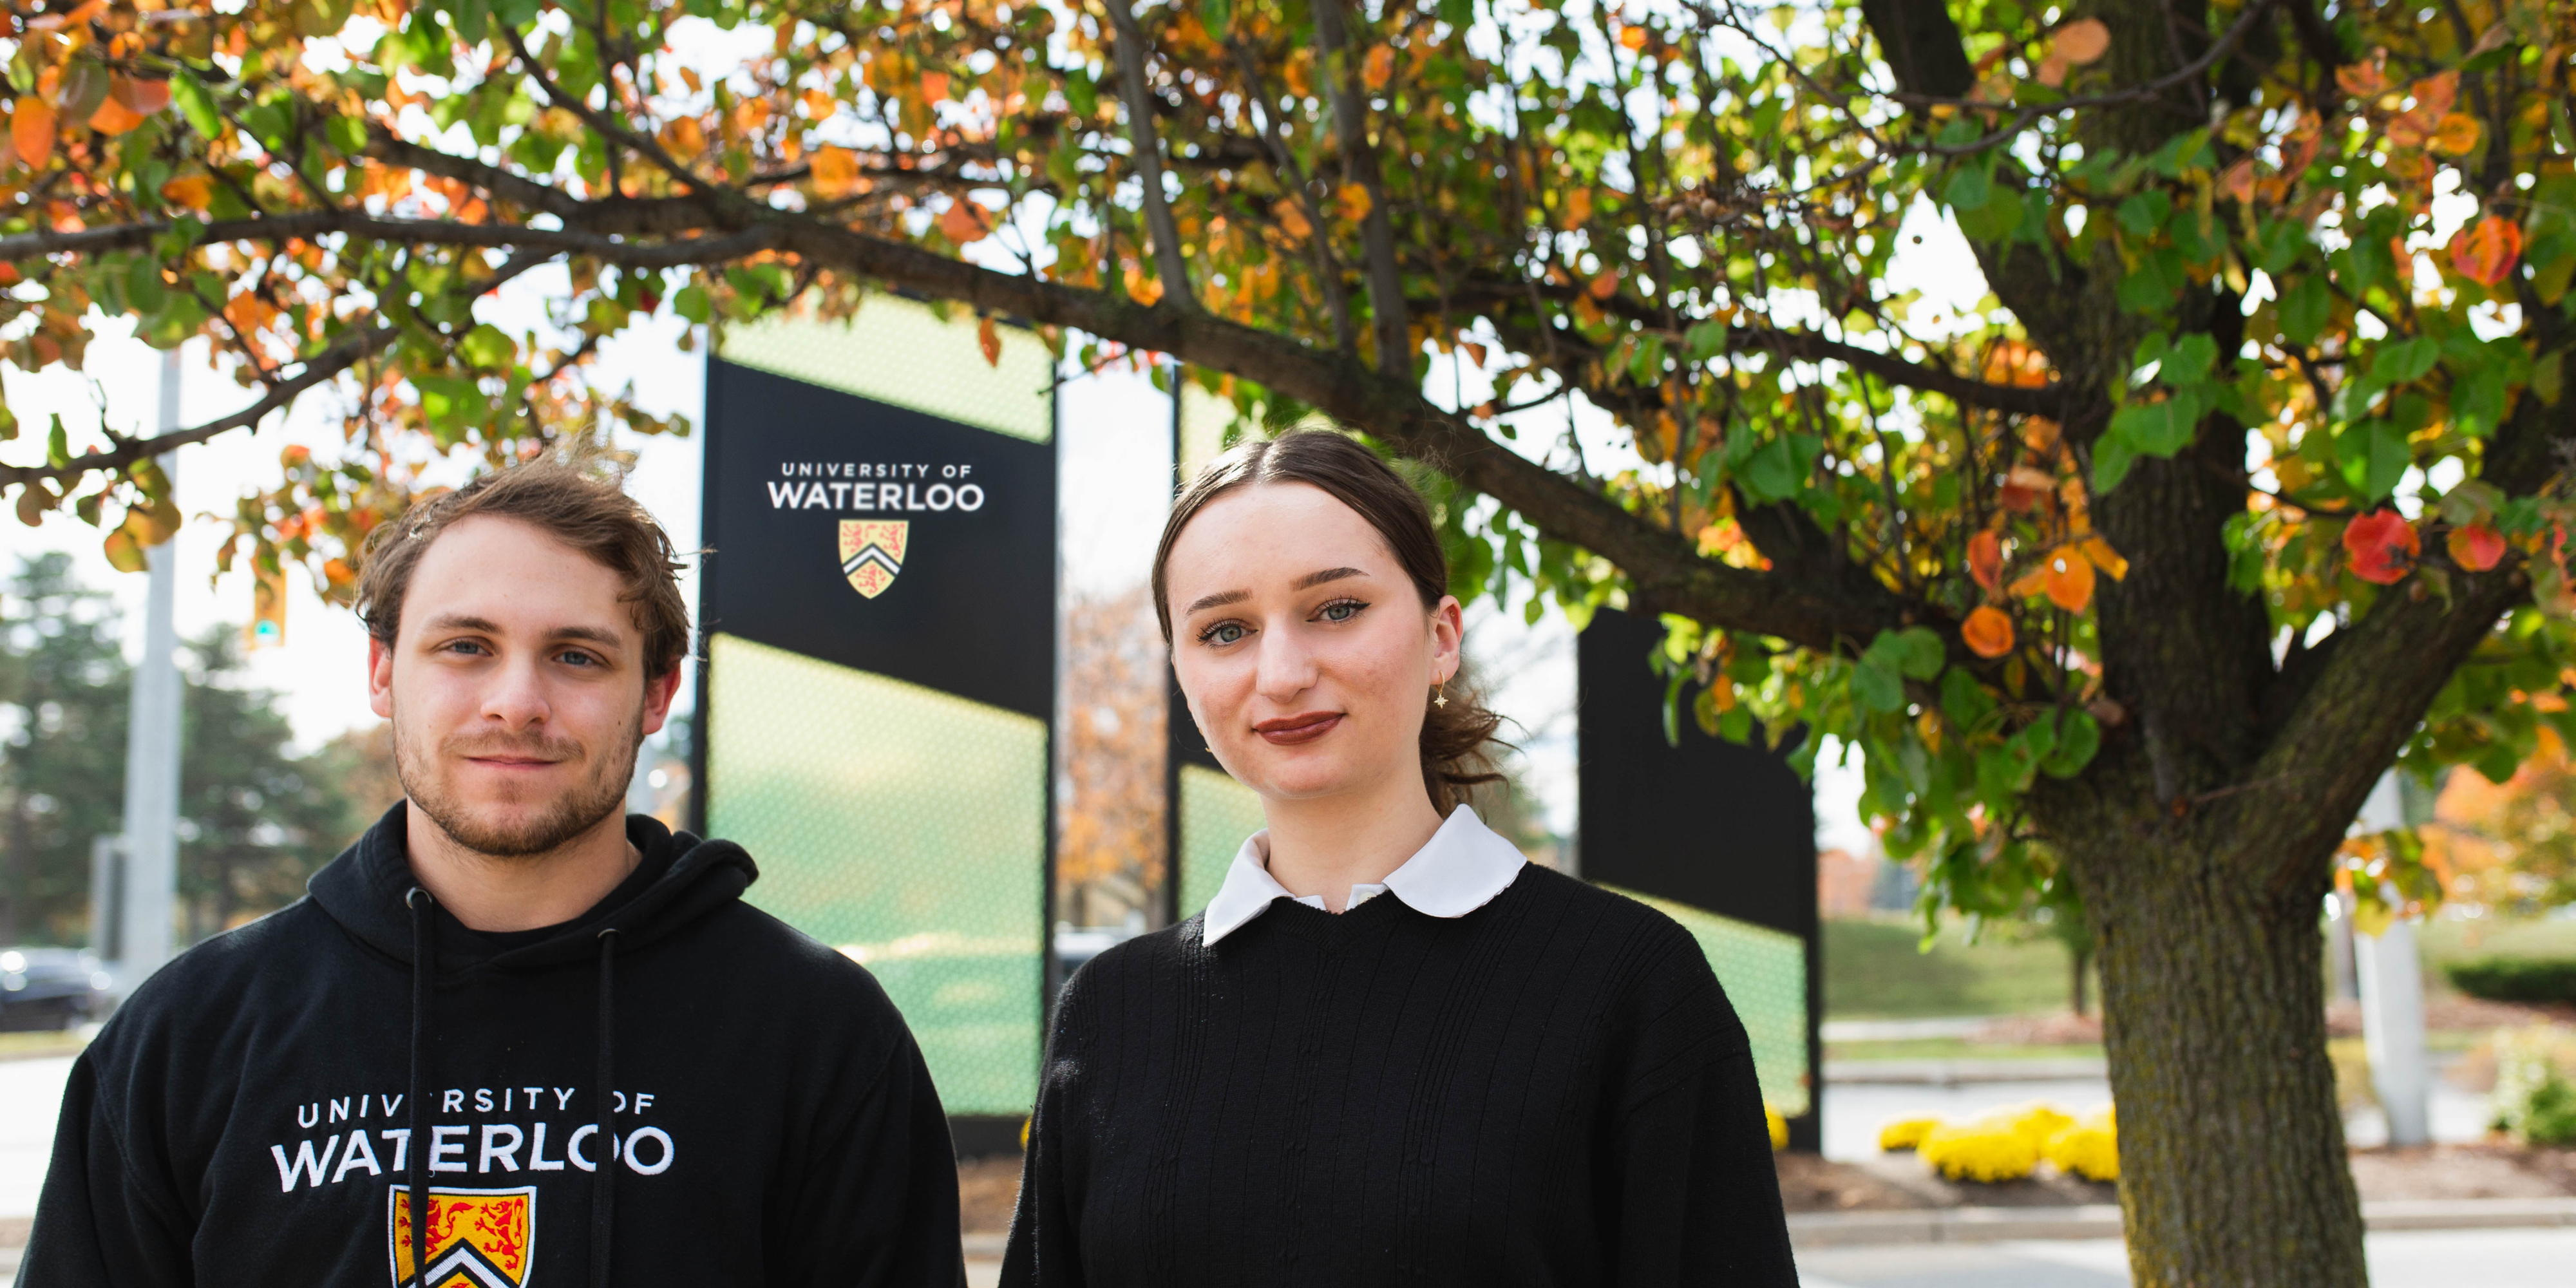 man and woman standing in front of university of waterloo sign